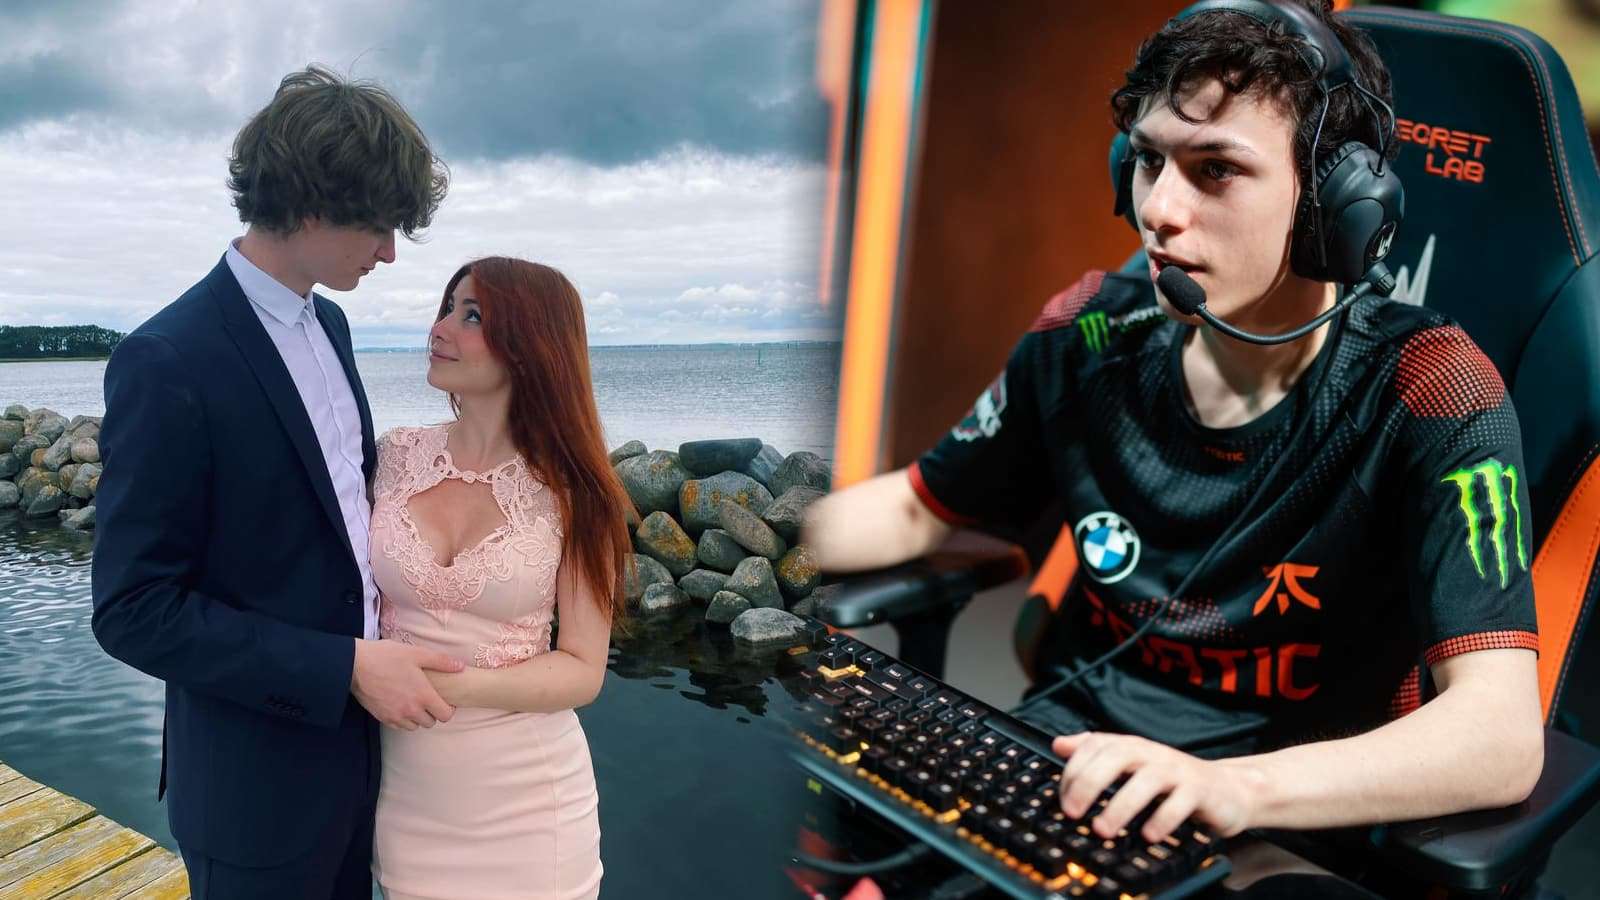 Upset's wife claims she's receiving death threats over drama with ex-Fnatic teammate Adam